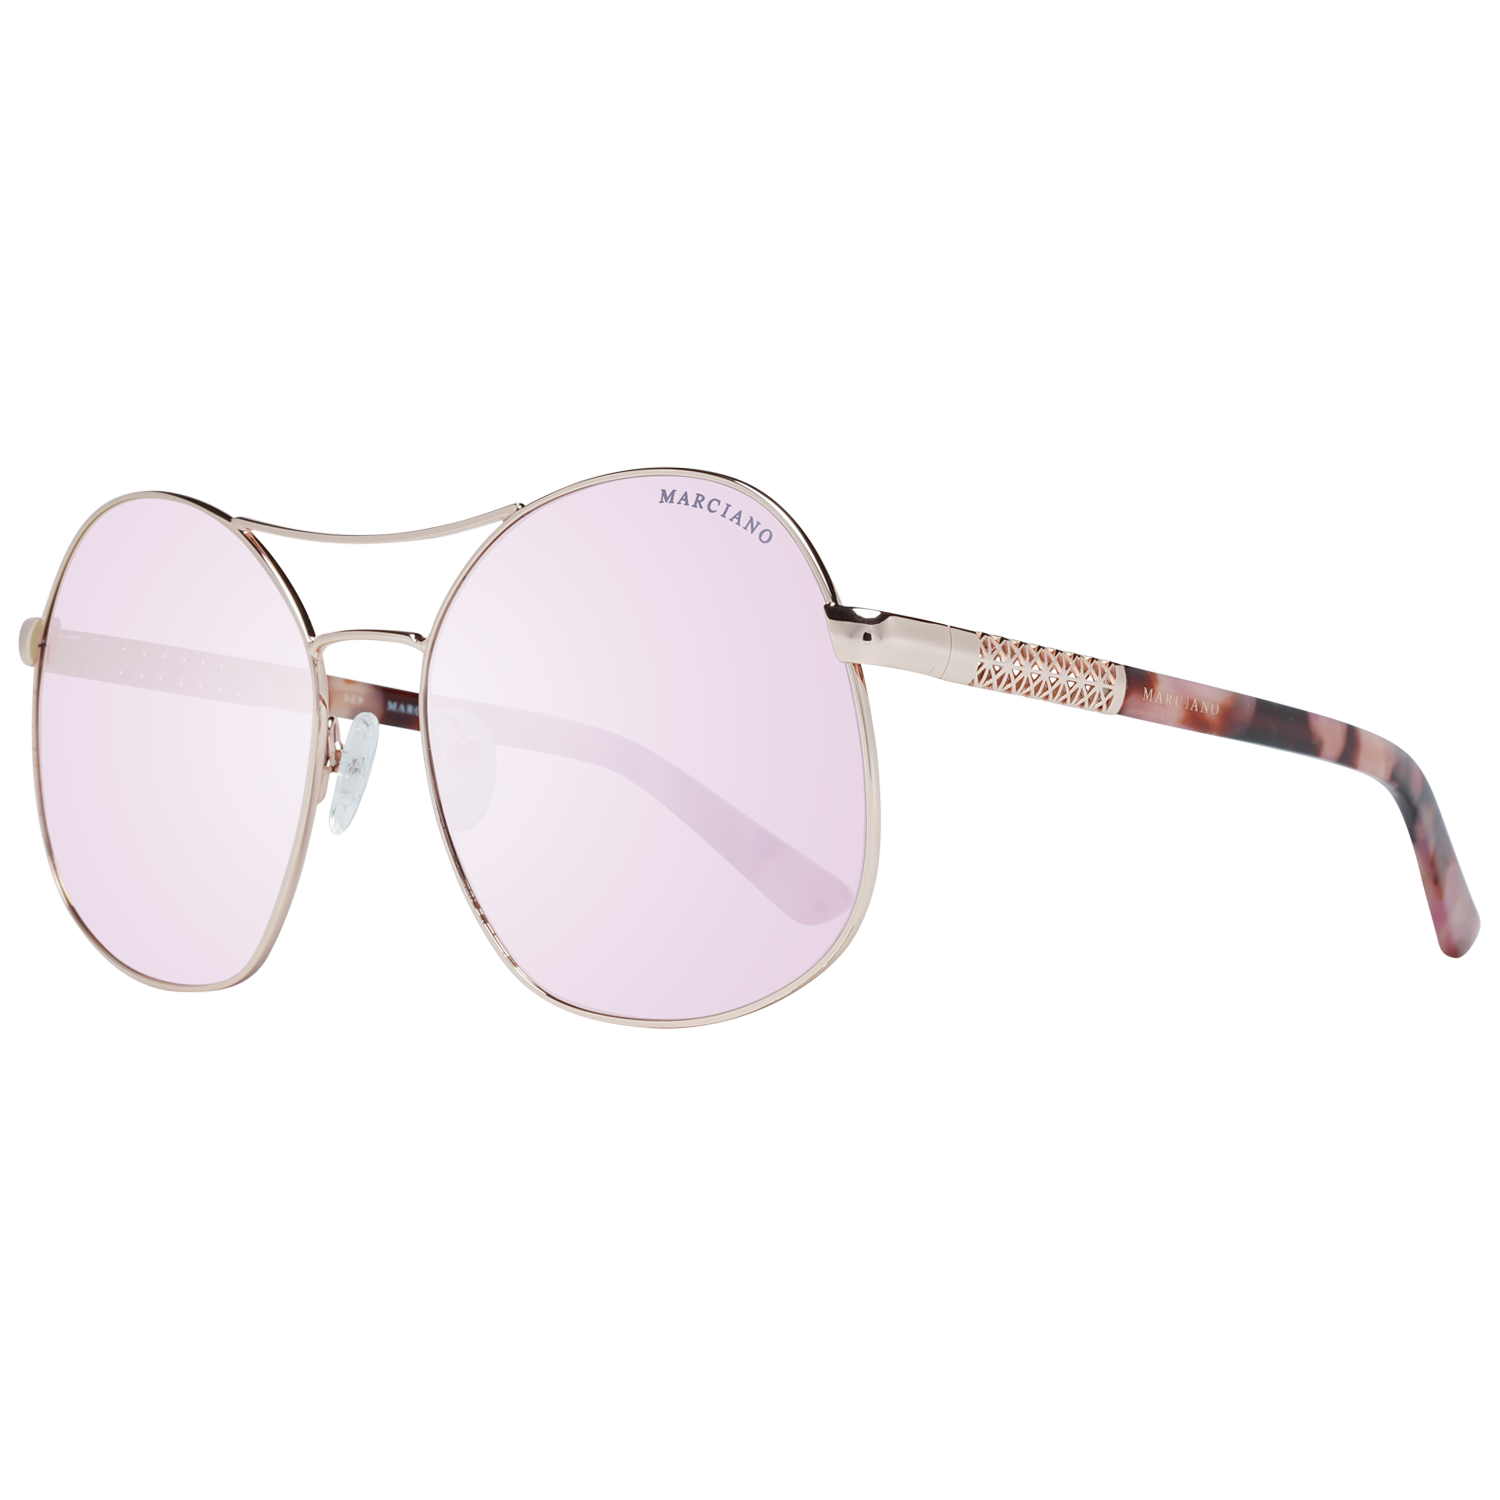 Guess By Marciano Sunglasses GM0807 28C 62 Rose Gold